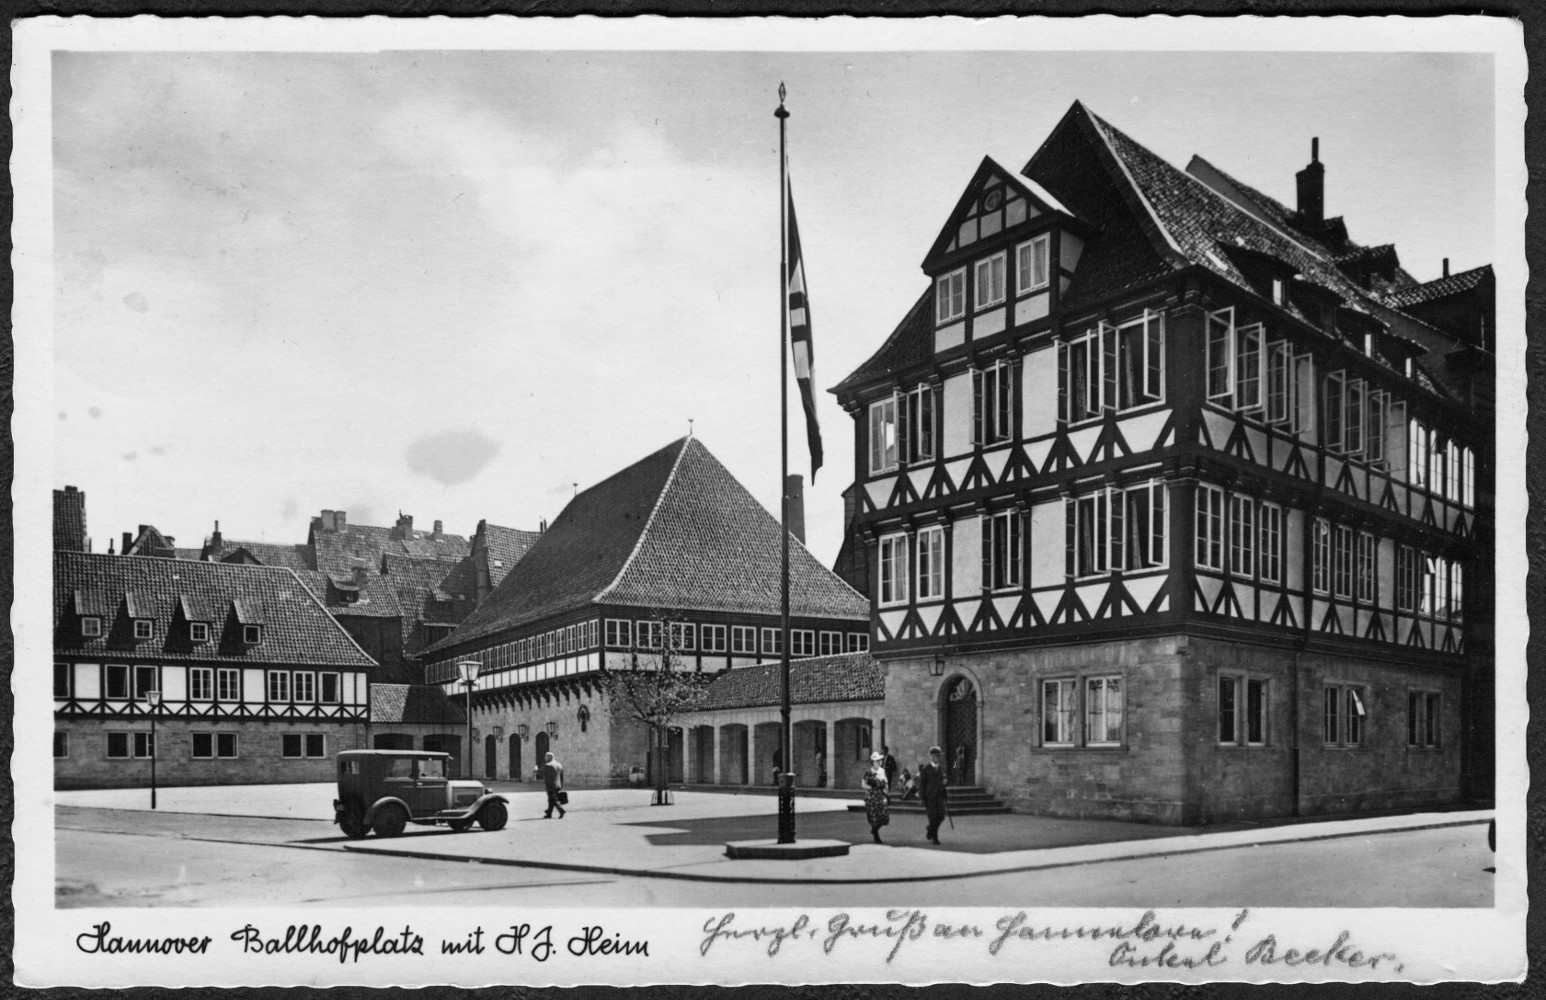 “Hanover. Ballhofplatz with Hitler Youth home", picture postcard published by F. Astholz, Wikimedia Commons, scan of the original: Claus-Peter Enders together with Bernd Schwabe in the Hanover Wikipedia office